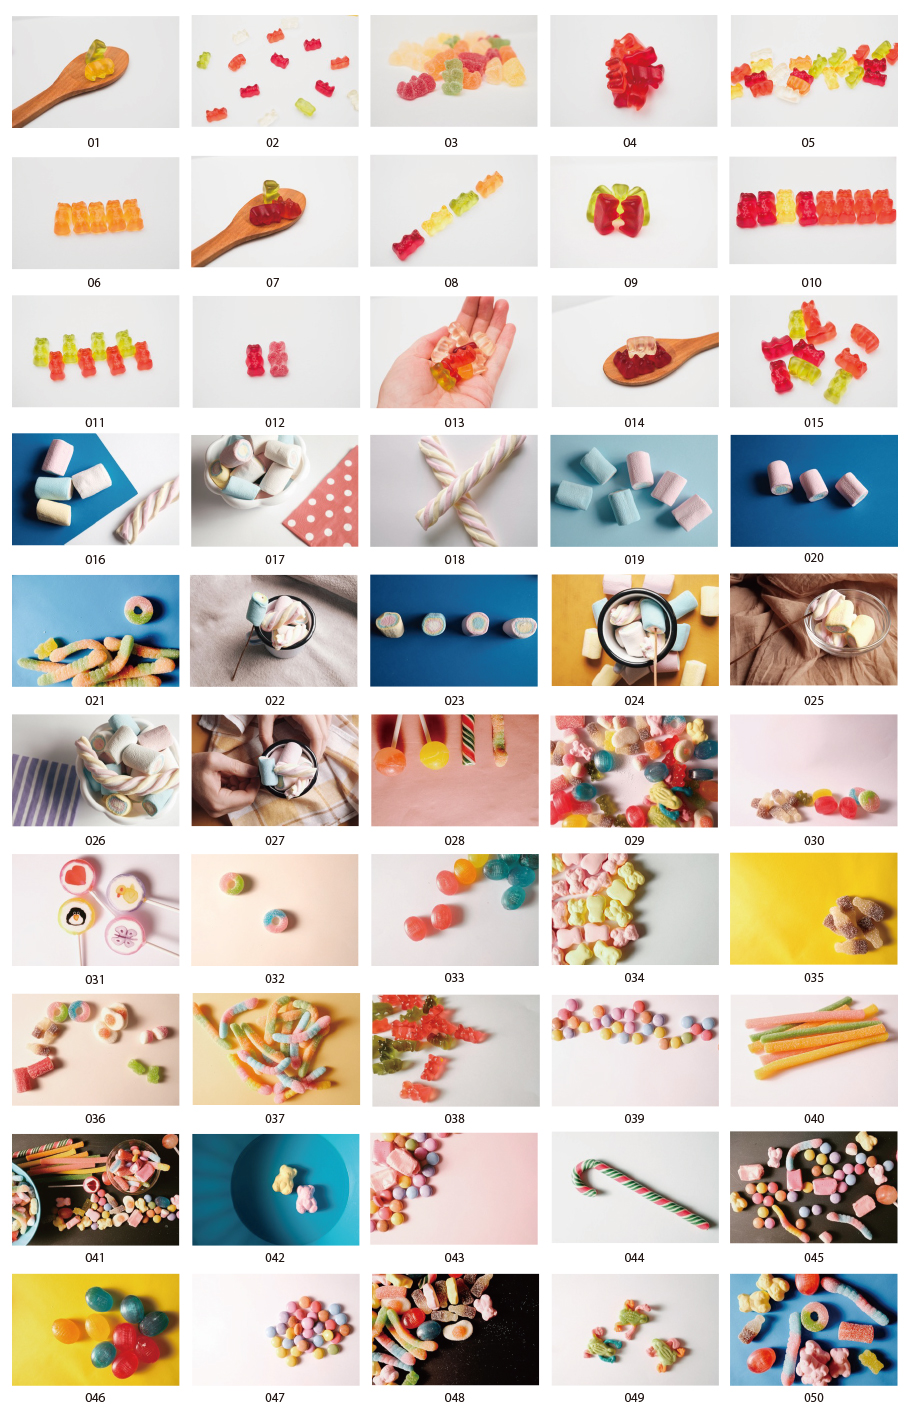 Colorful candy photos